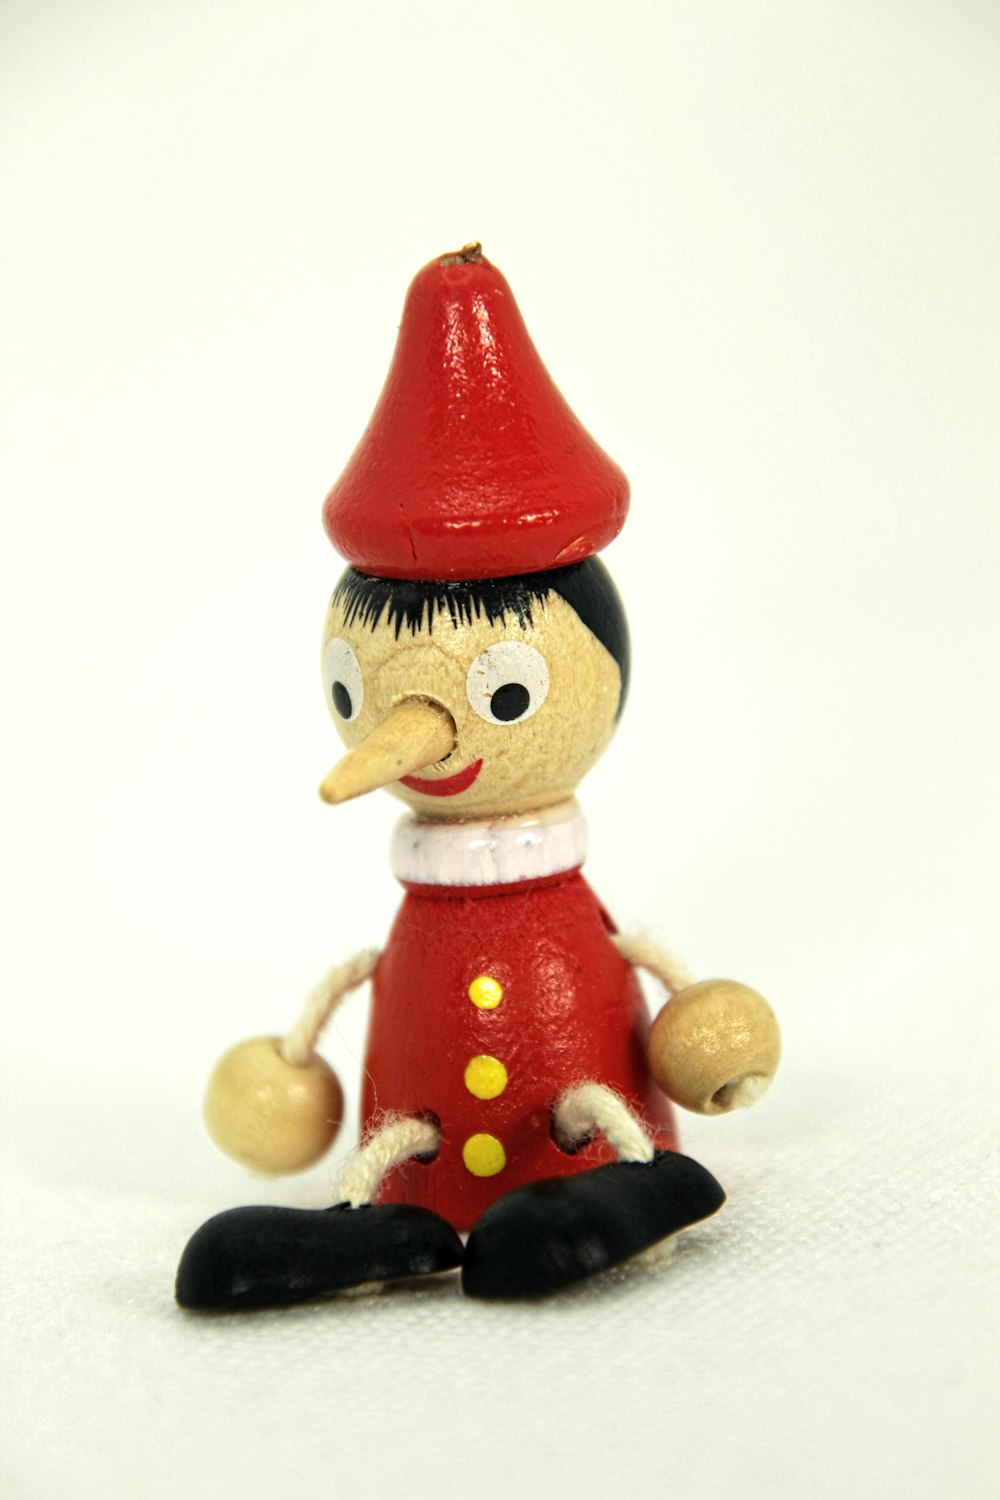 a toy figurine of a boy with a red hat